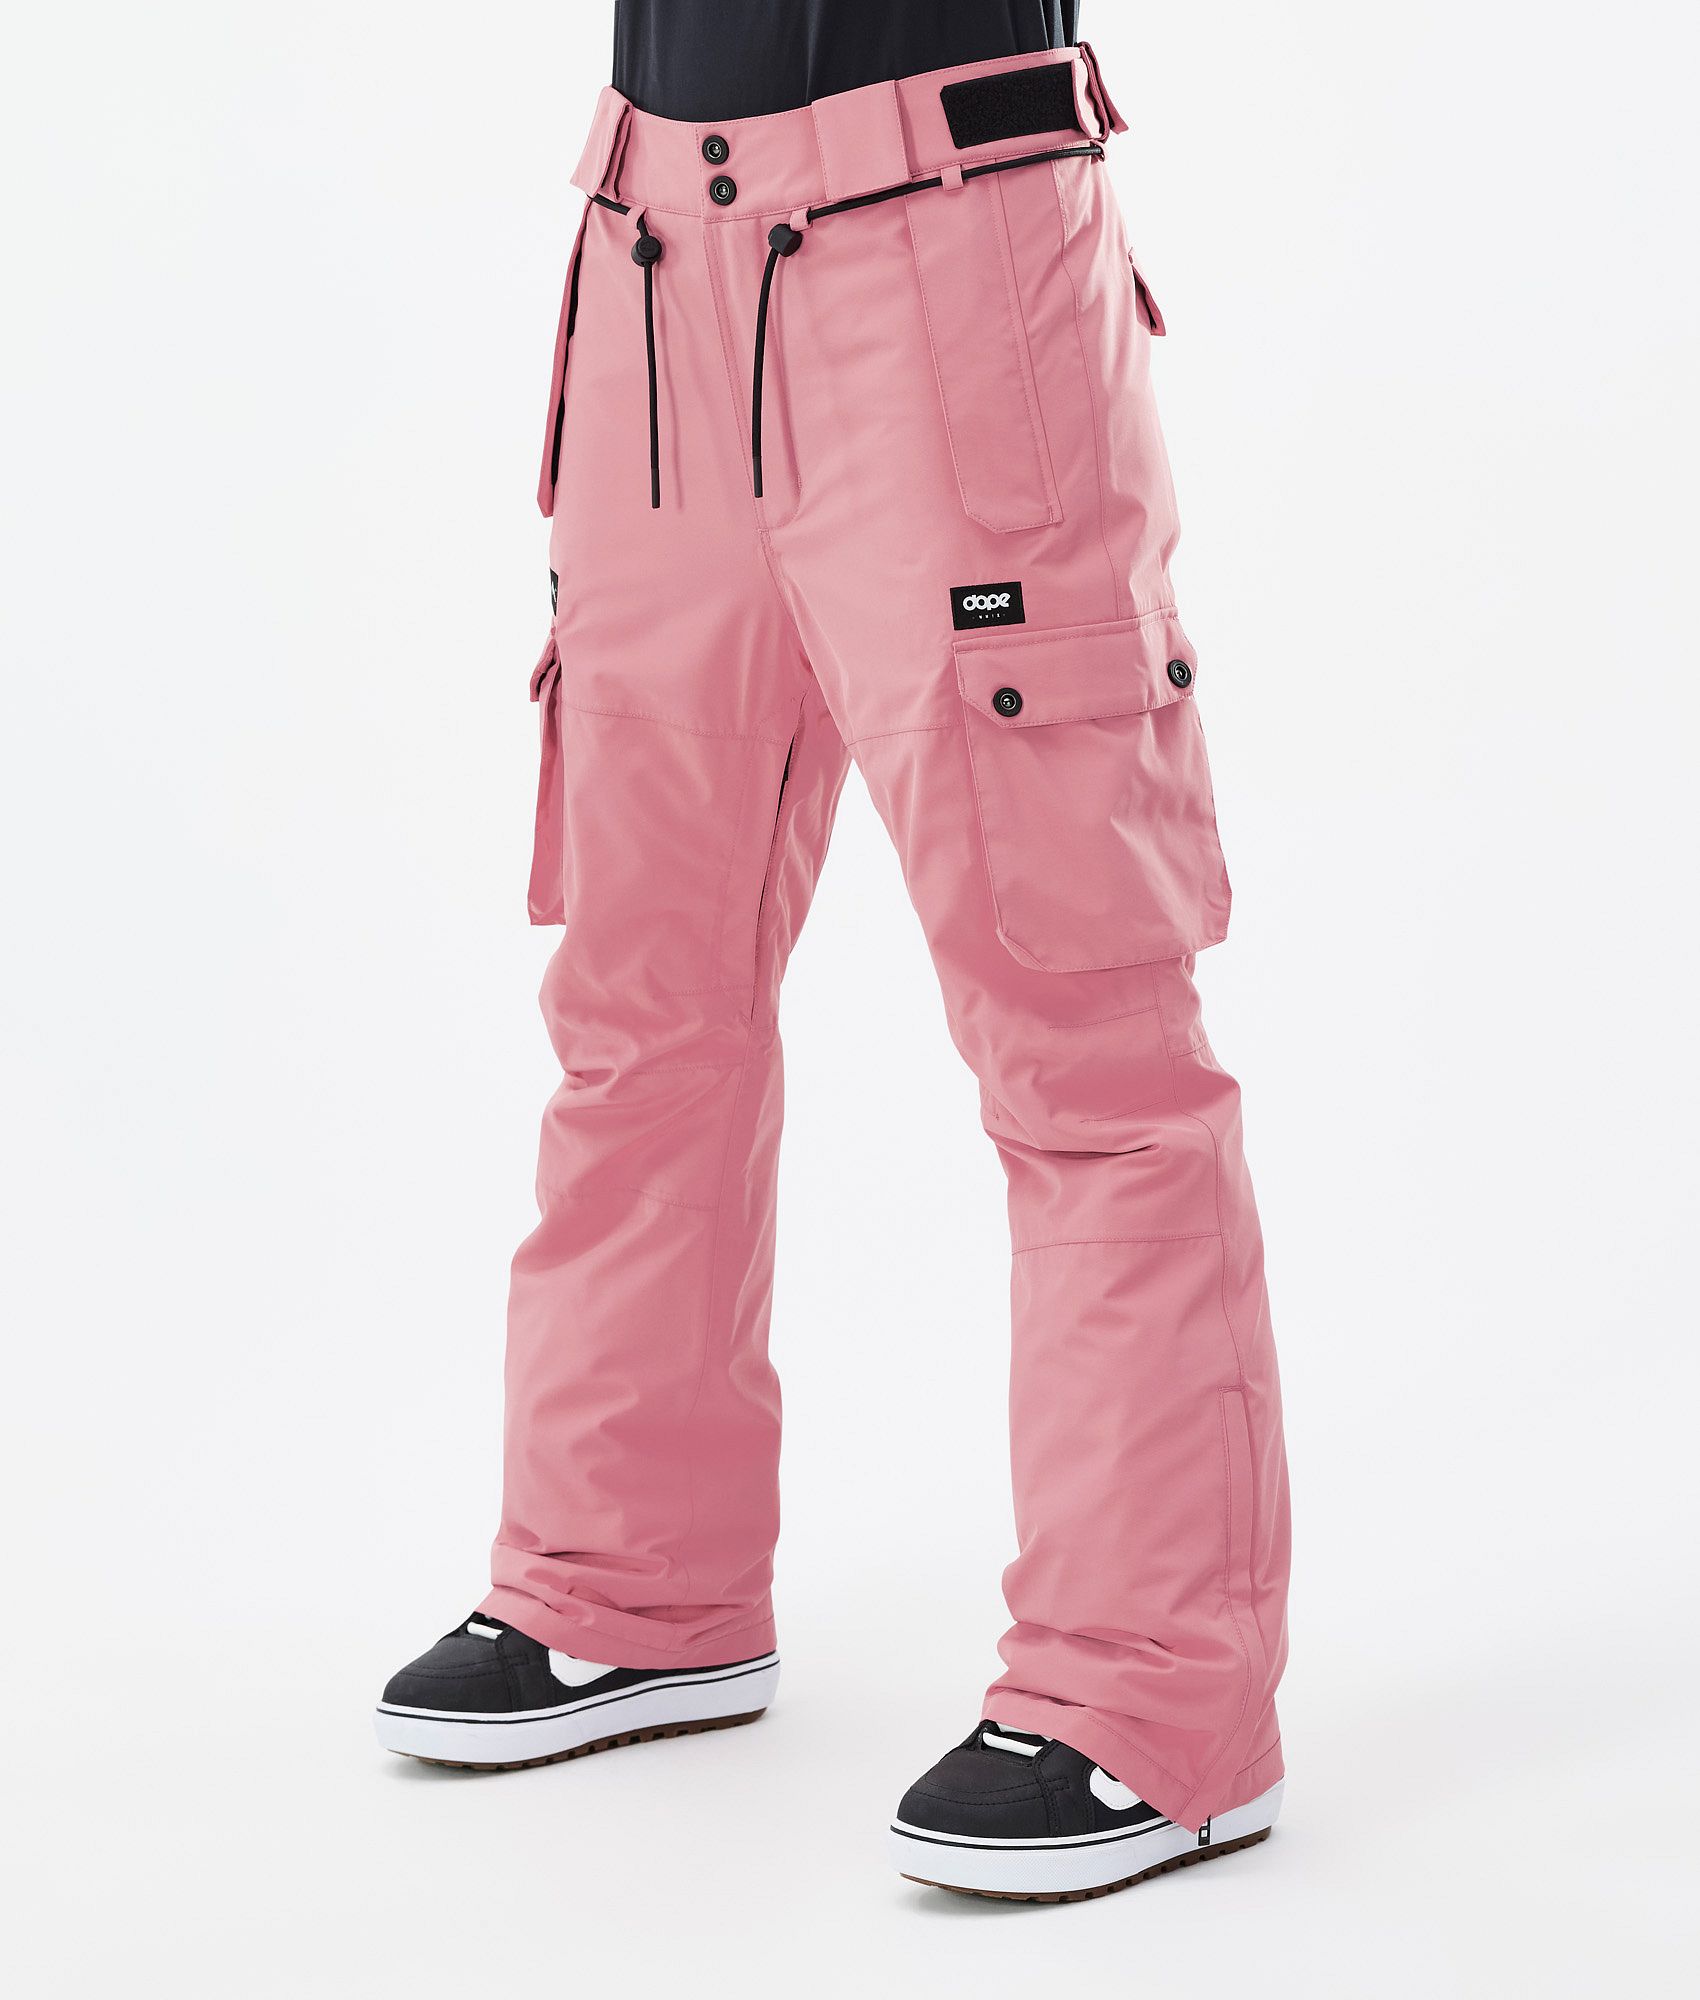 PlusSize Snow Pants For Hitting The Slopes This Winter